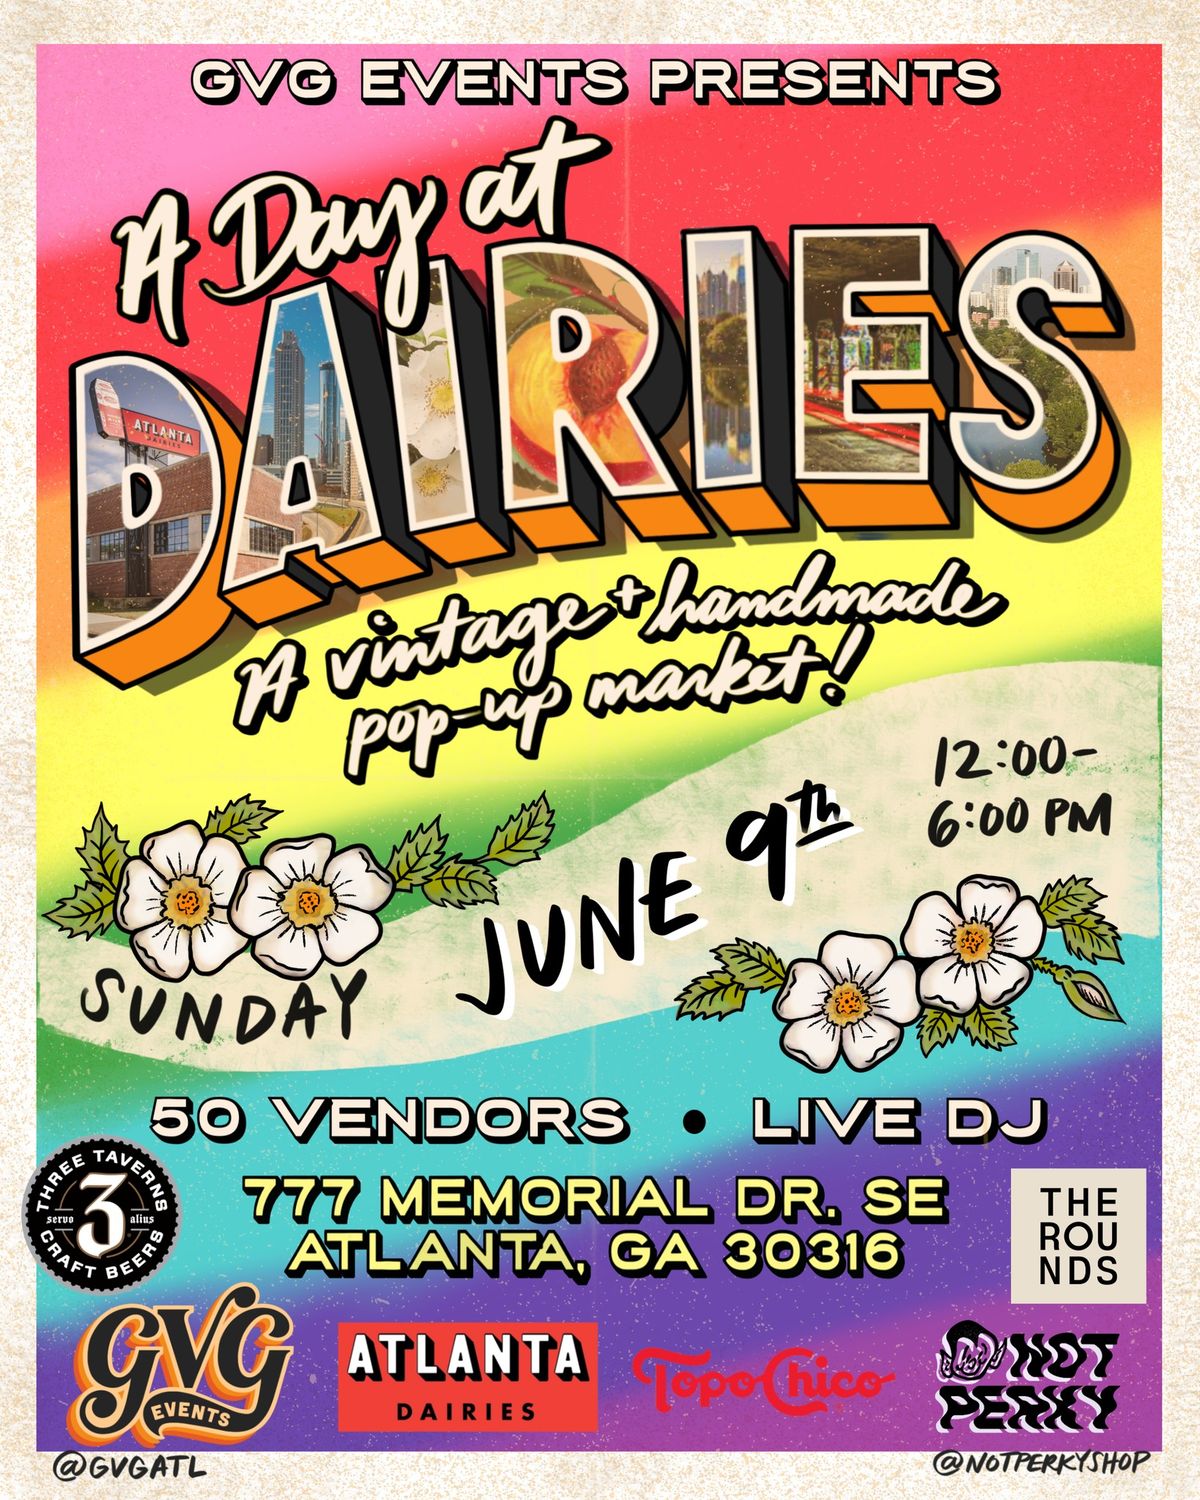 A Day at Dairies- A Vintage and Handmade Pop-Up